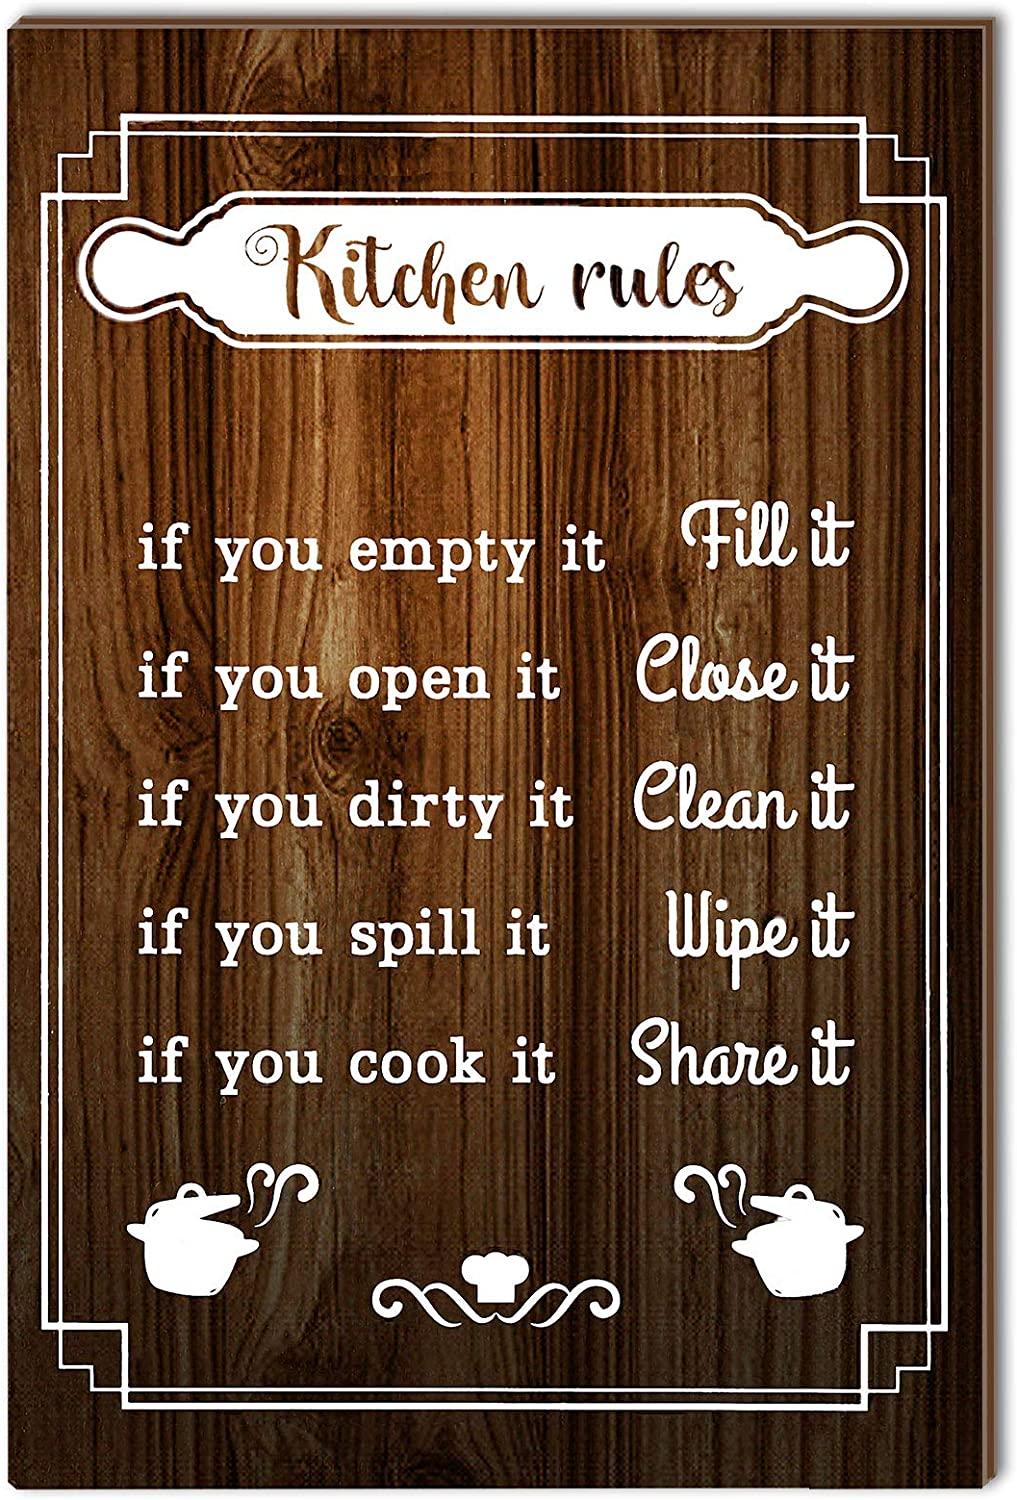 Jetec Kitchen Rules Sign Funny Kitchen Rules Wall Decor Rustic Wood Kitchen Sign Farmhouse Kitchen Wood Wall Art Decor Wood Plaque Hanging Sign for Home Housewarming Kitchen Decor, 12 x 8 Inch